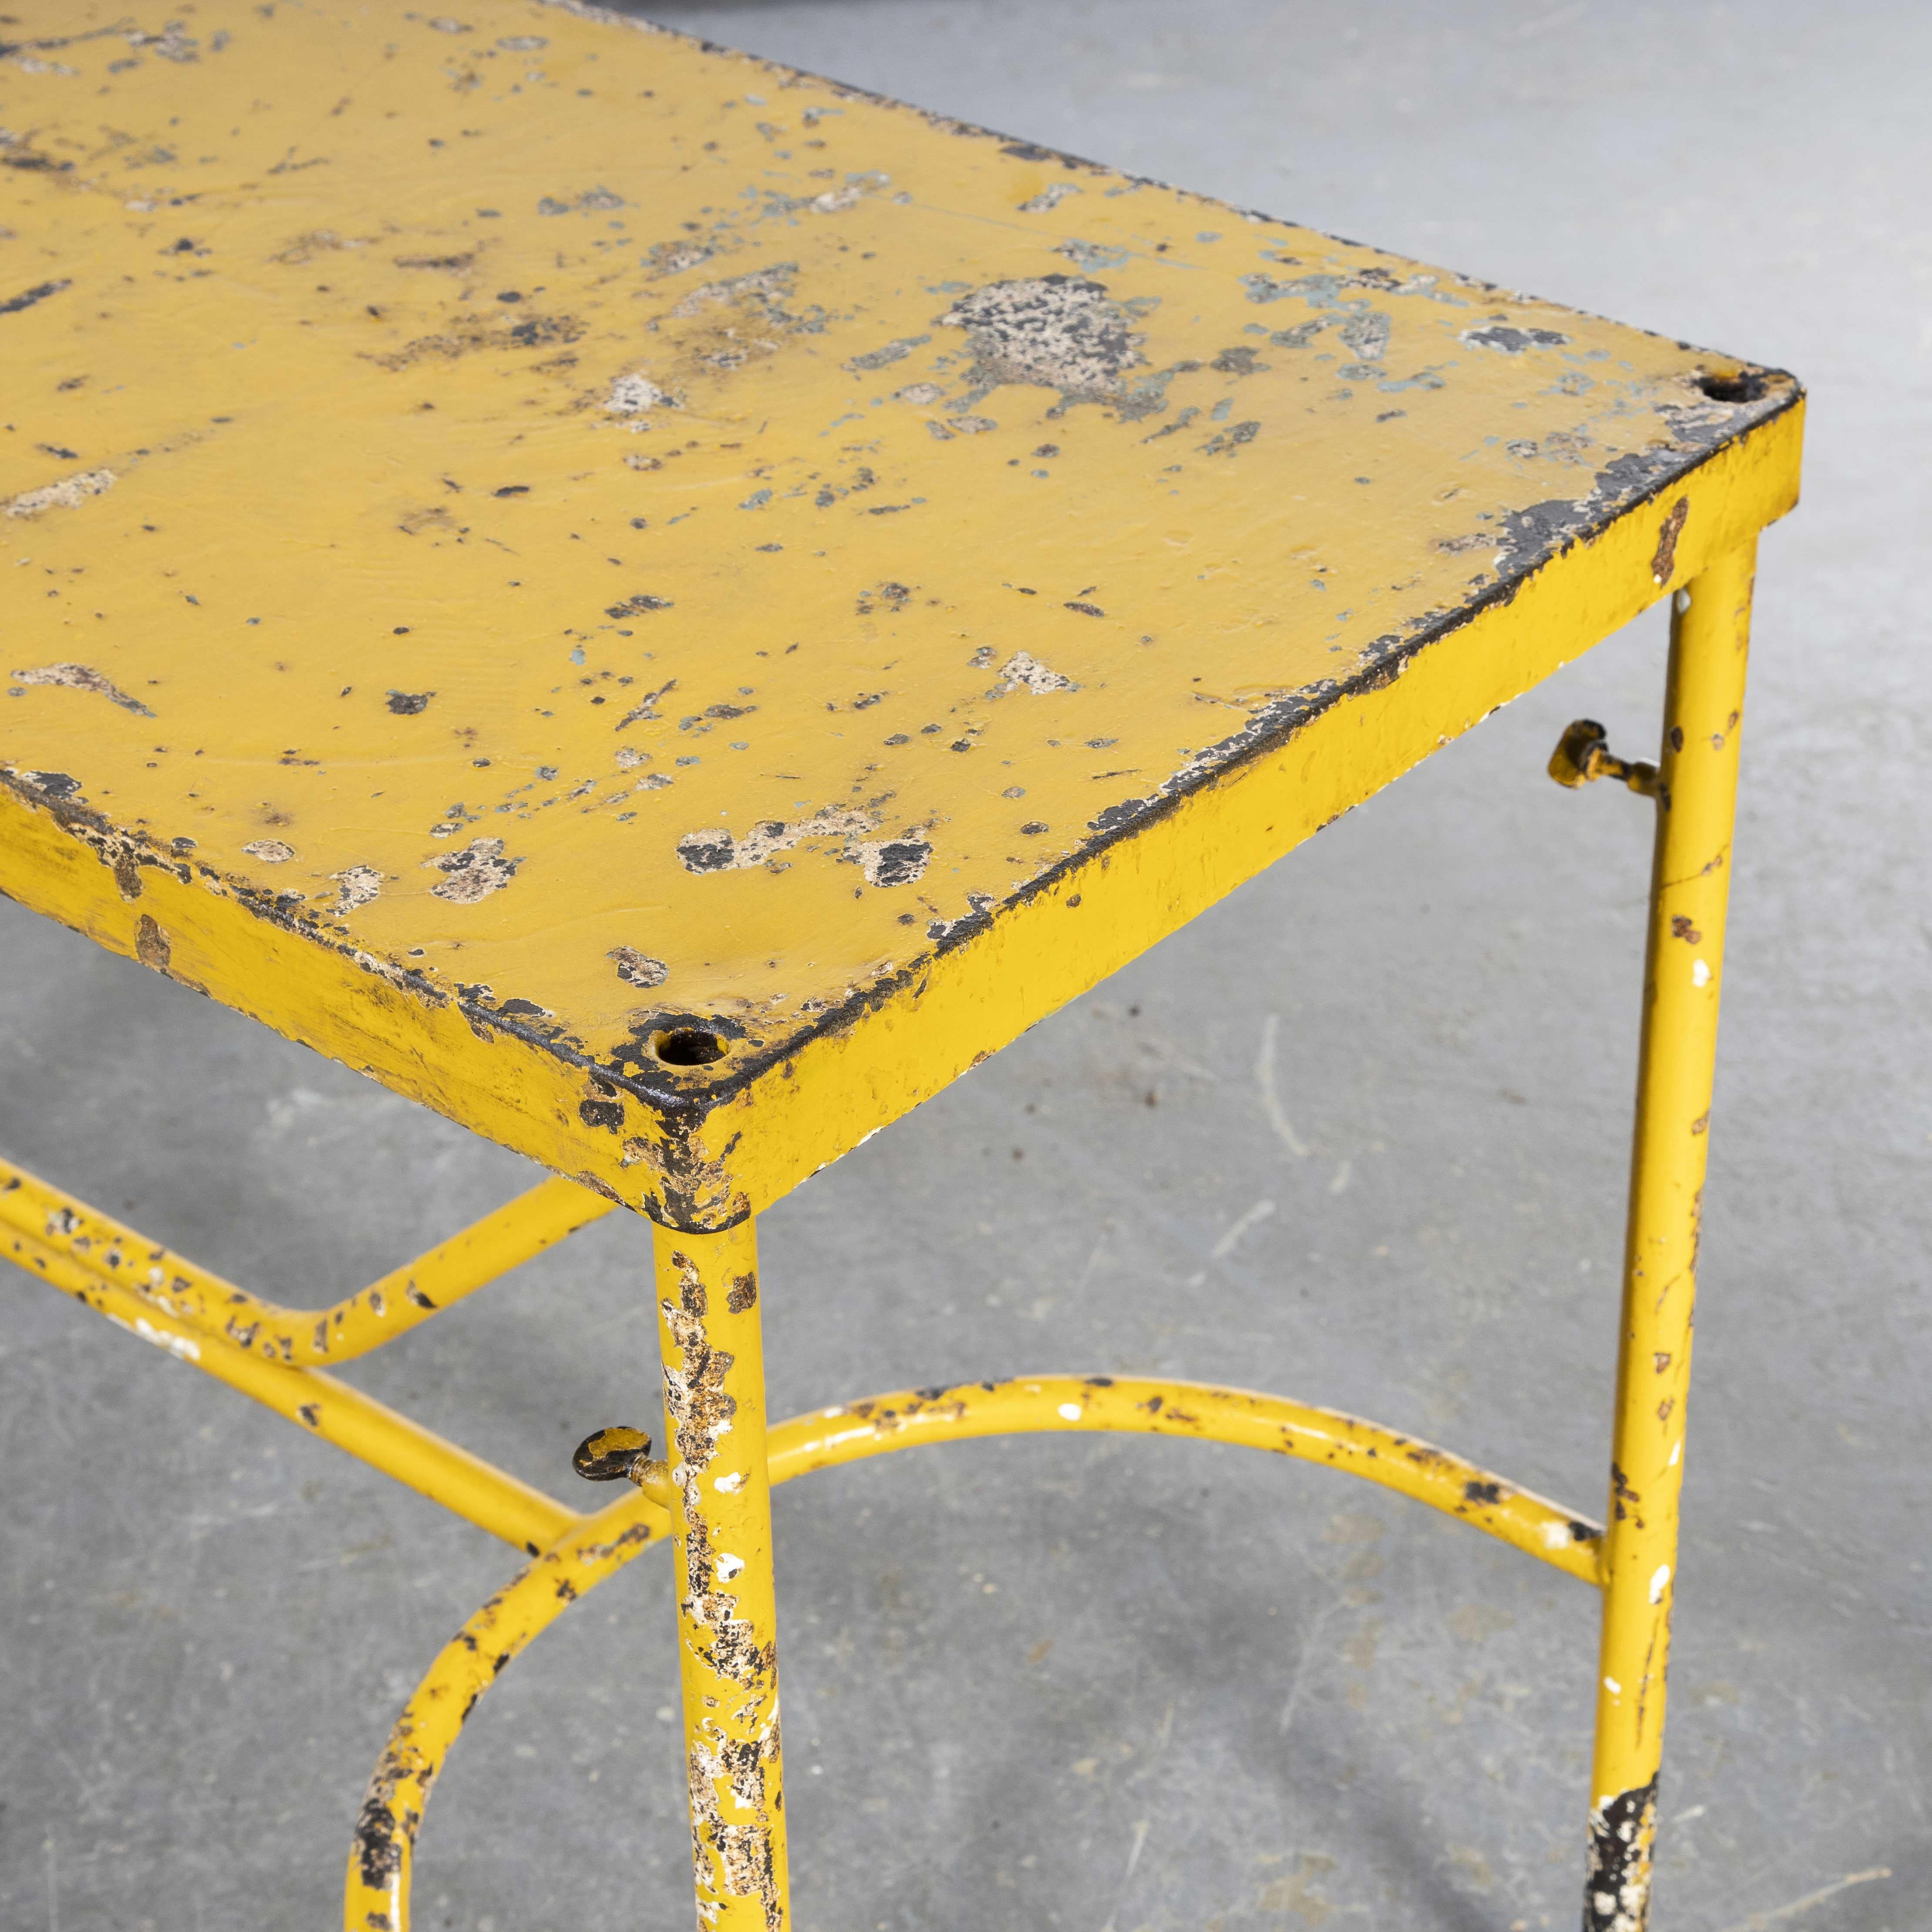 1960’s French Army Industrial field table – Yellow
1960’s French Army Industrial field table. Heavy weight Industrial table originally used as a field table in field hospitals. The main table is 139 in length, 190 total including the headrest